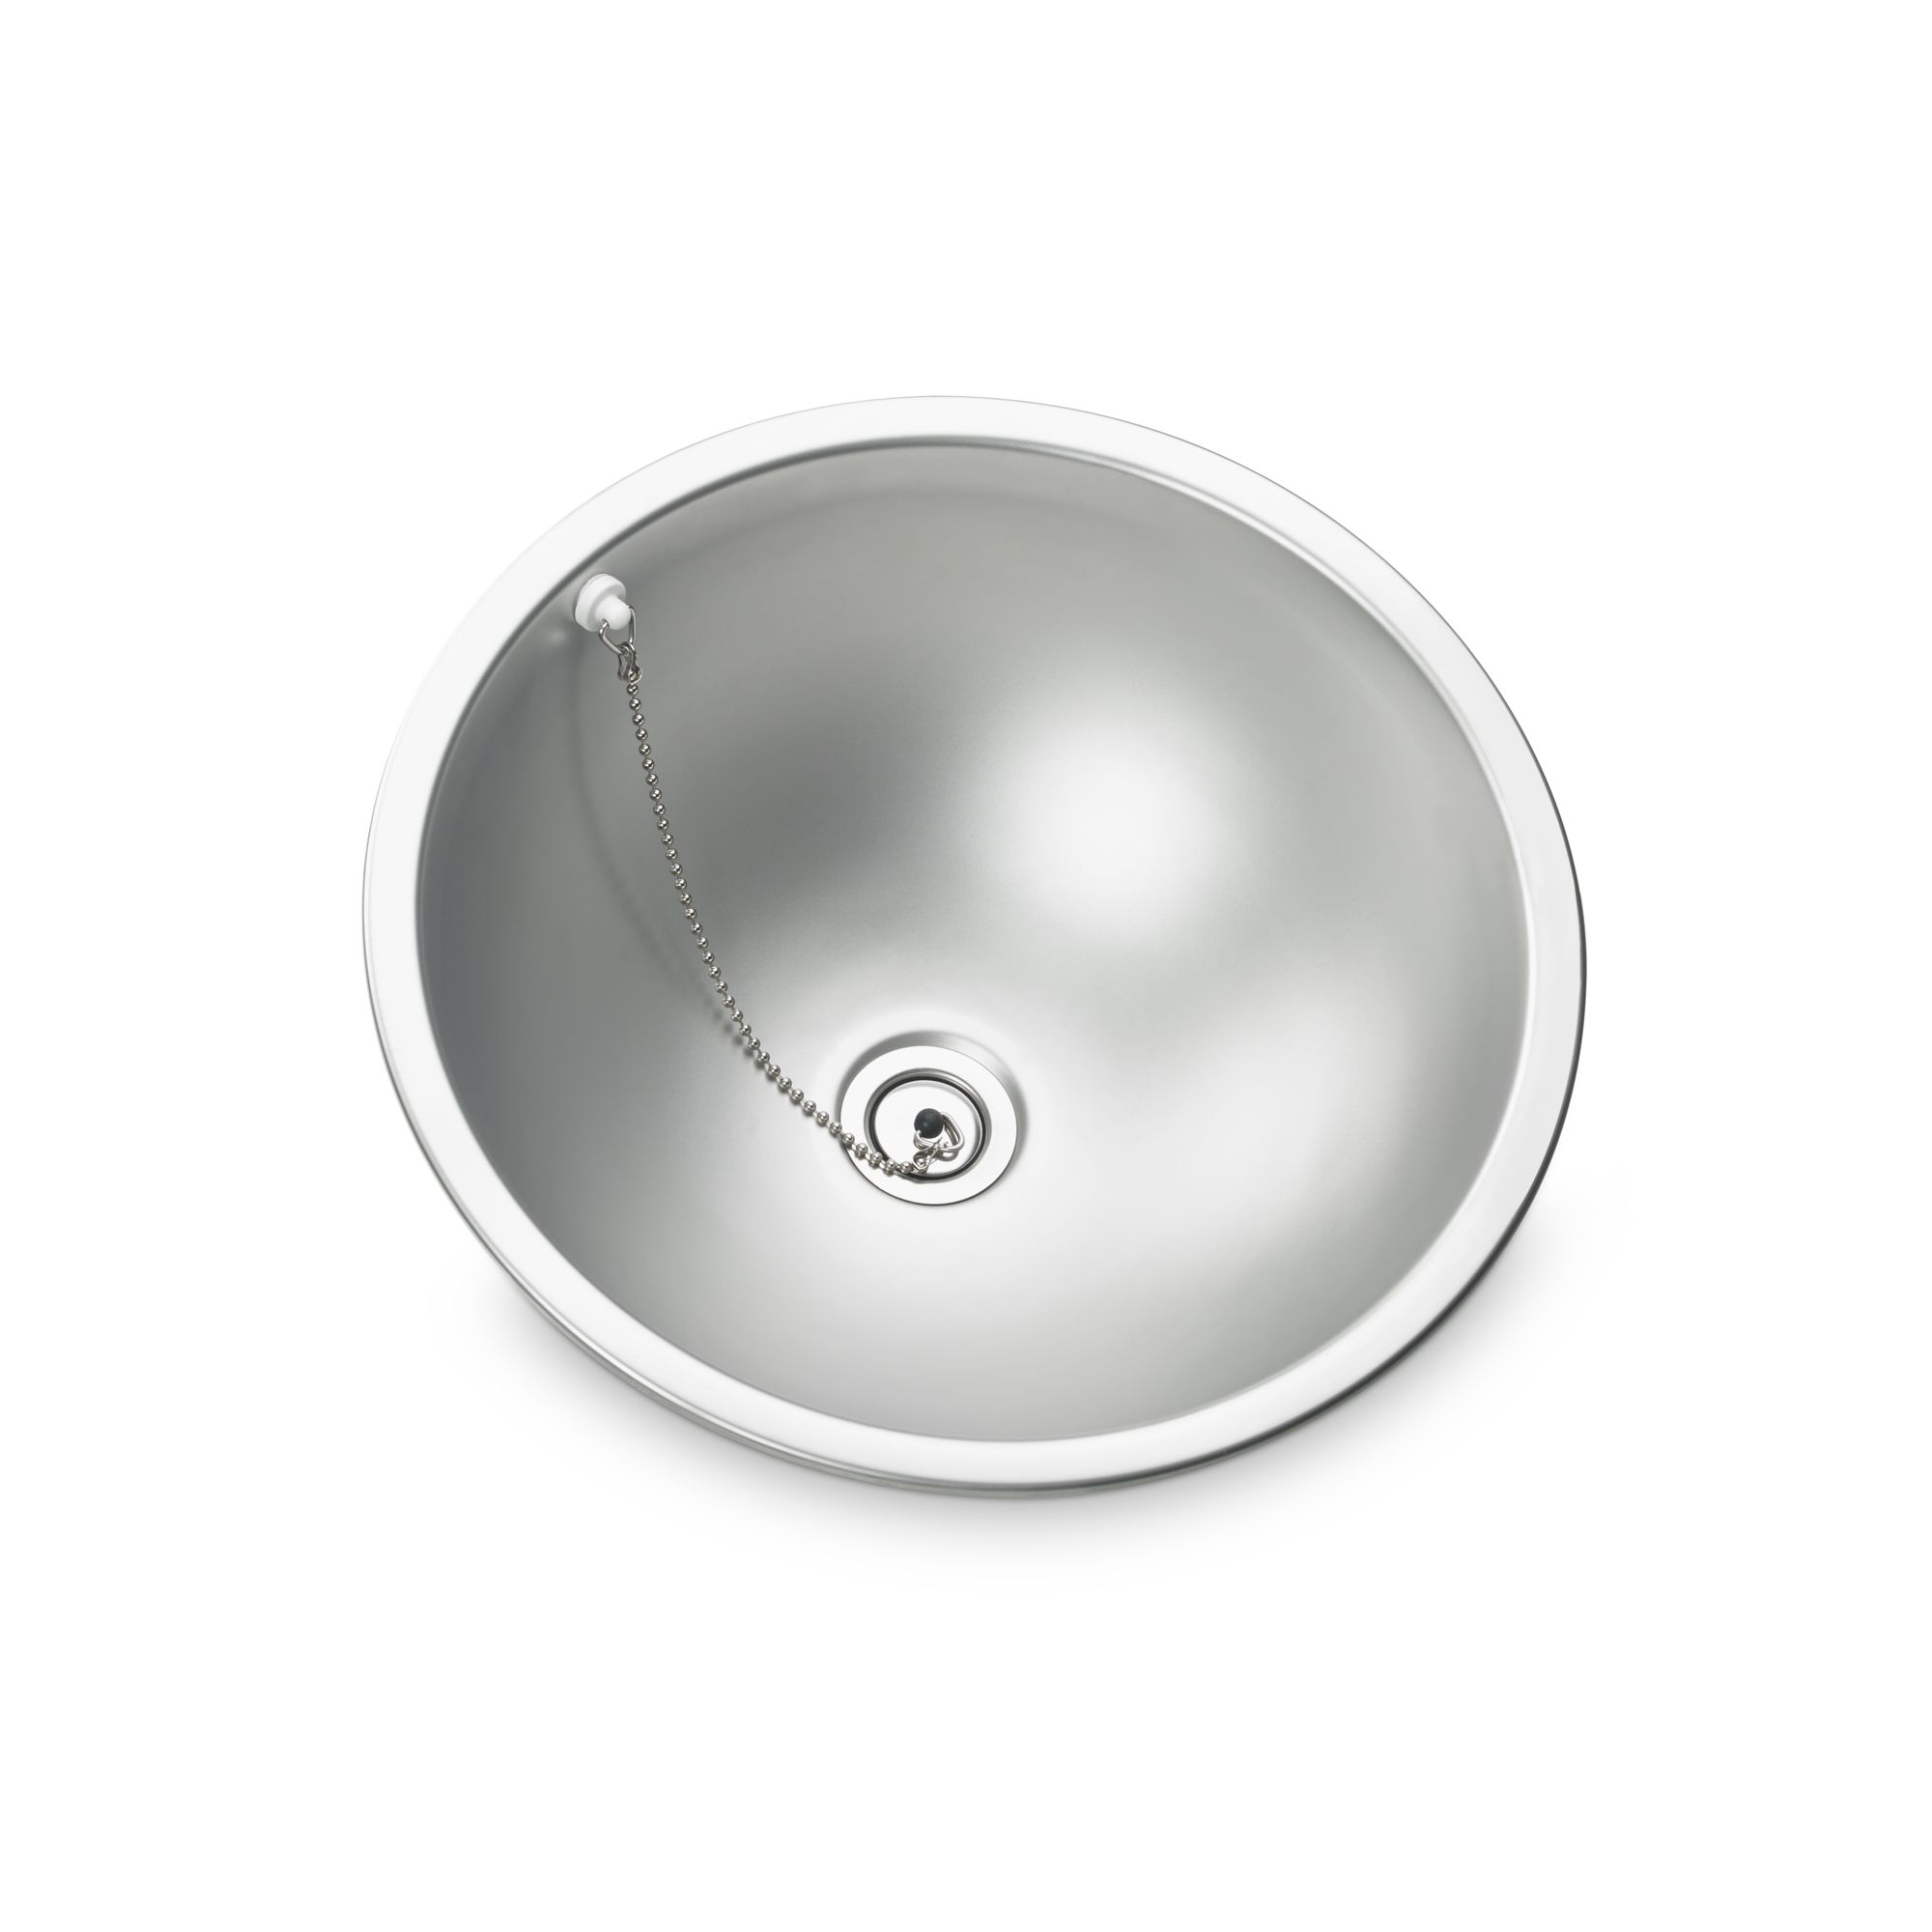 Dometic CE02 B325-I stainless steel sink/wash basin, 325 mm diameter